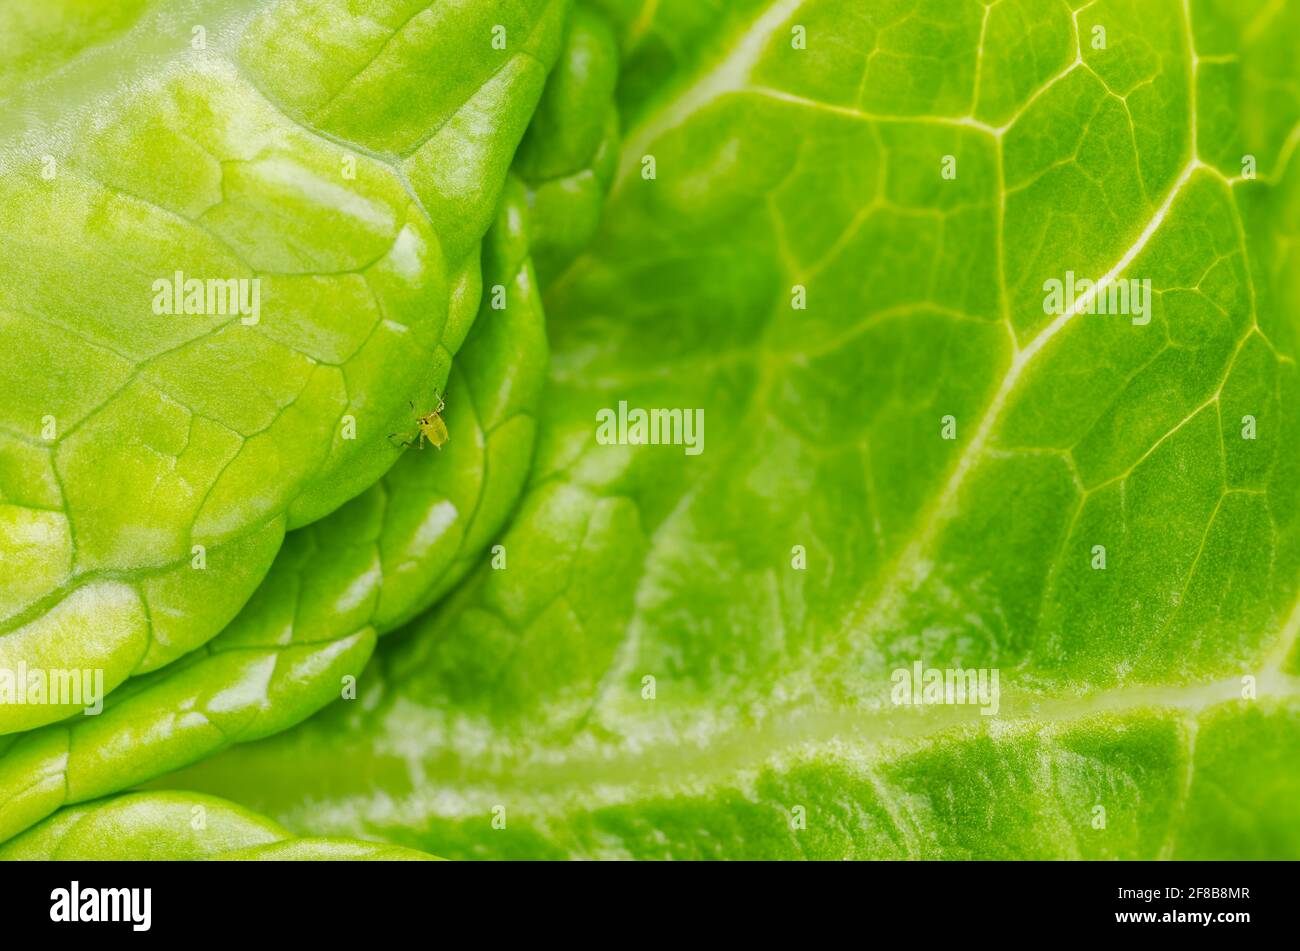 Plant louse on green lettuce leaf. Green aphid, sap-sucking on fresh Romaine lettuce leaf. Greenfly, insect of Aphidoidea family. Stock Photo